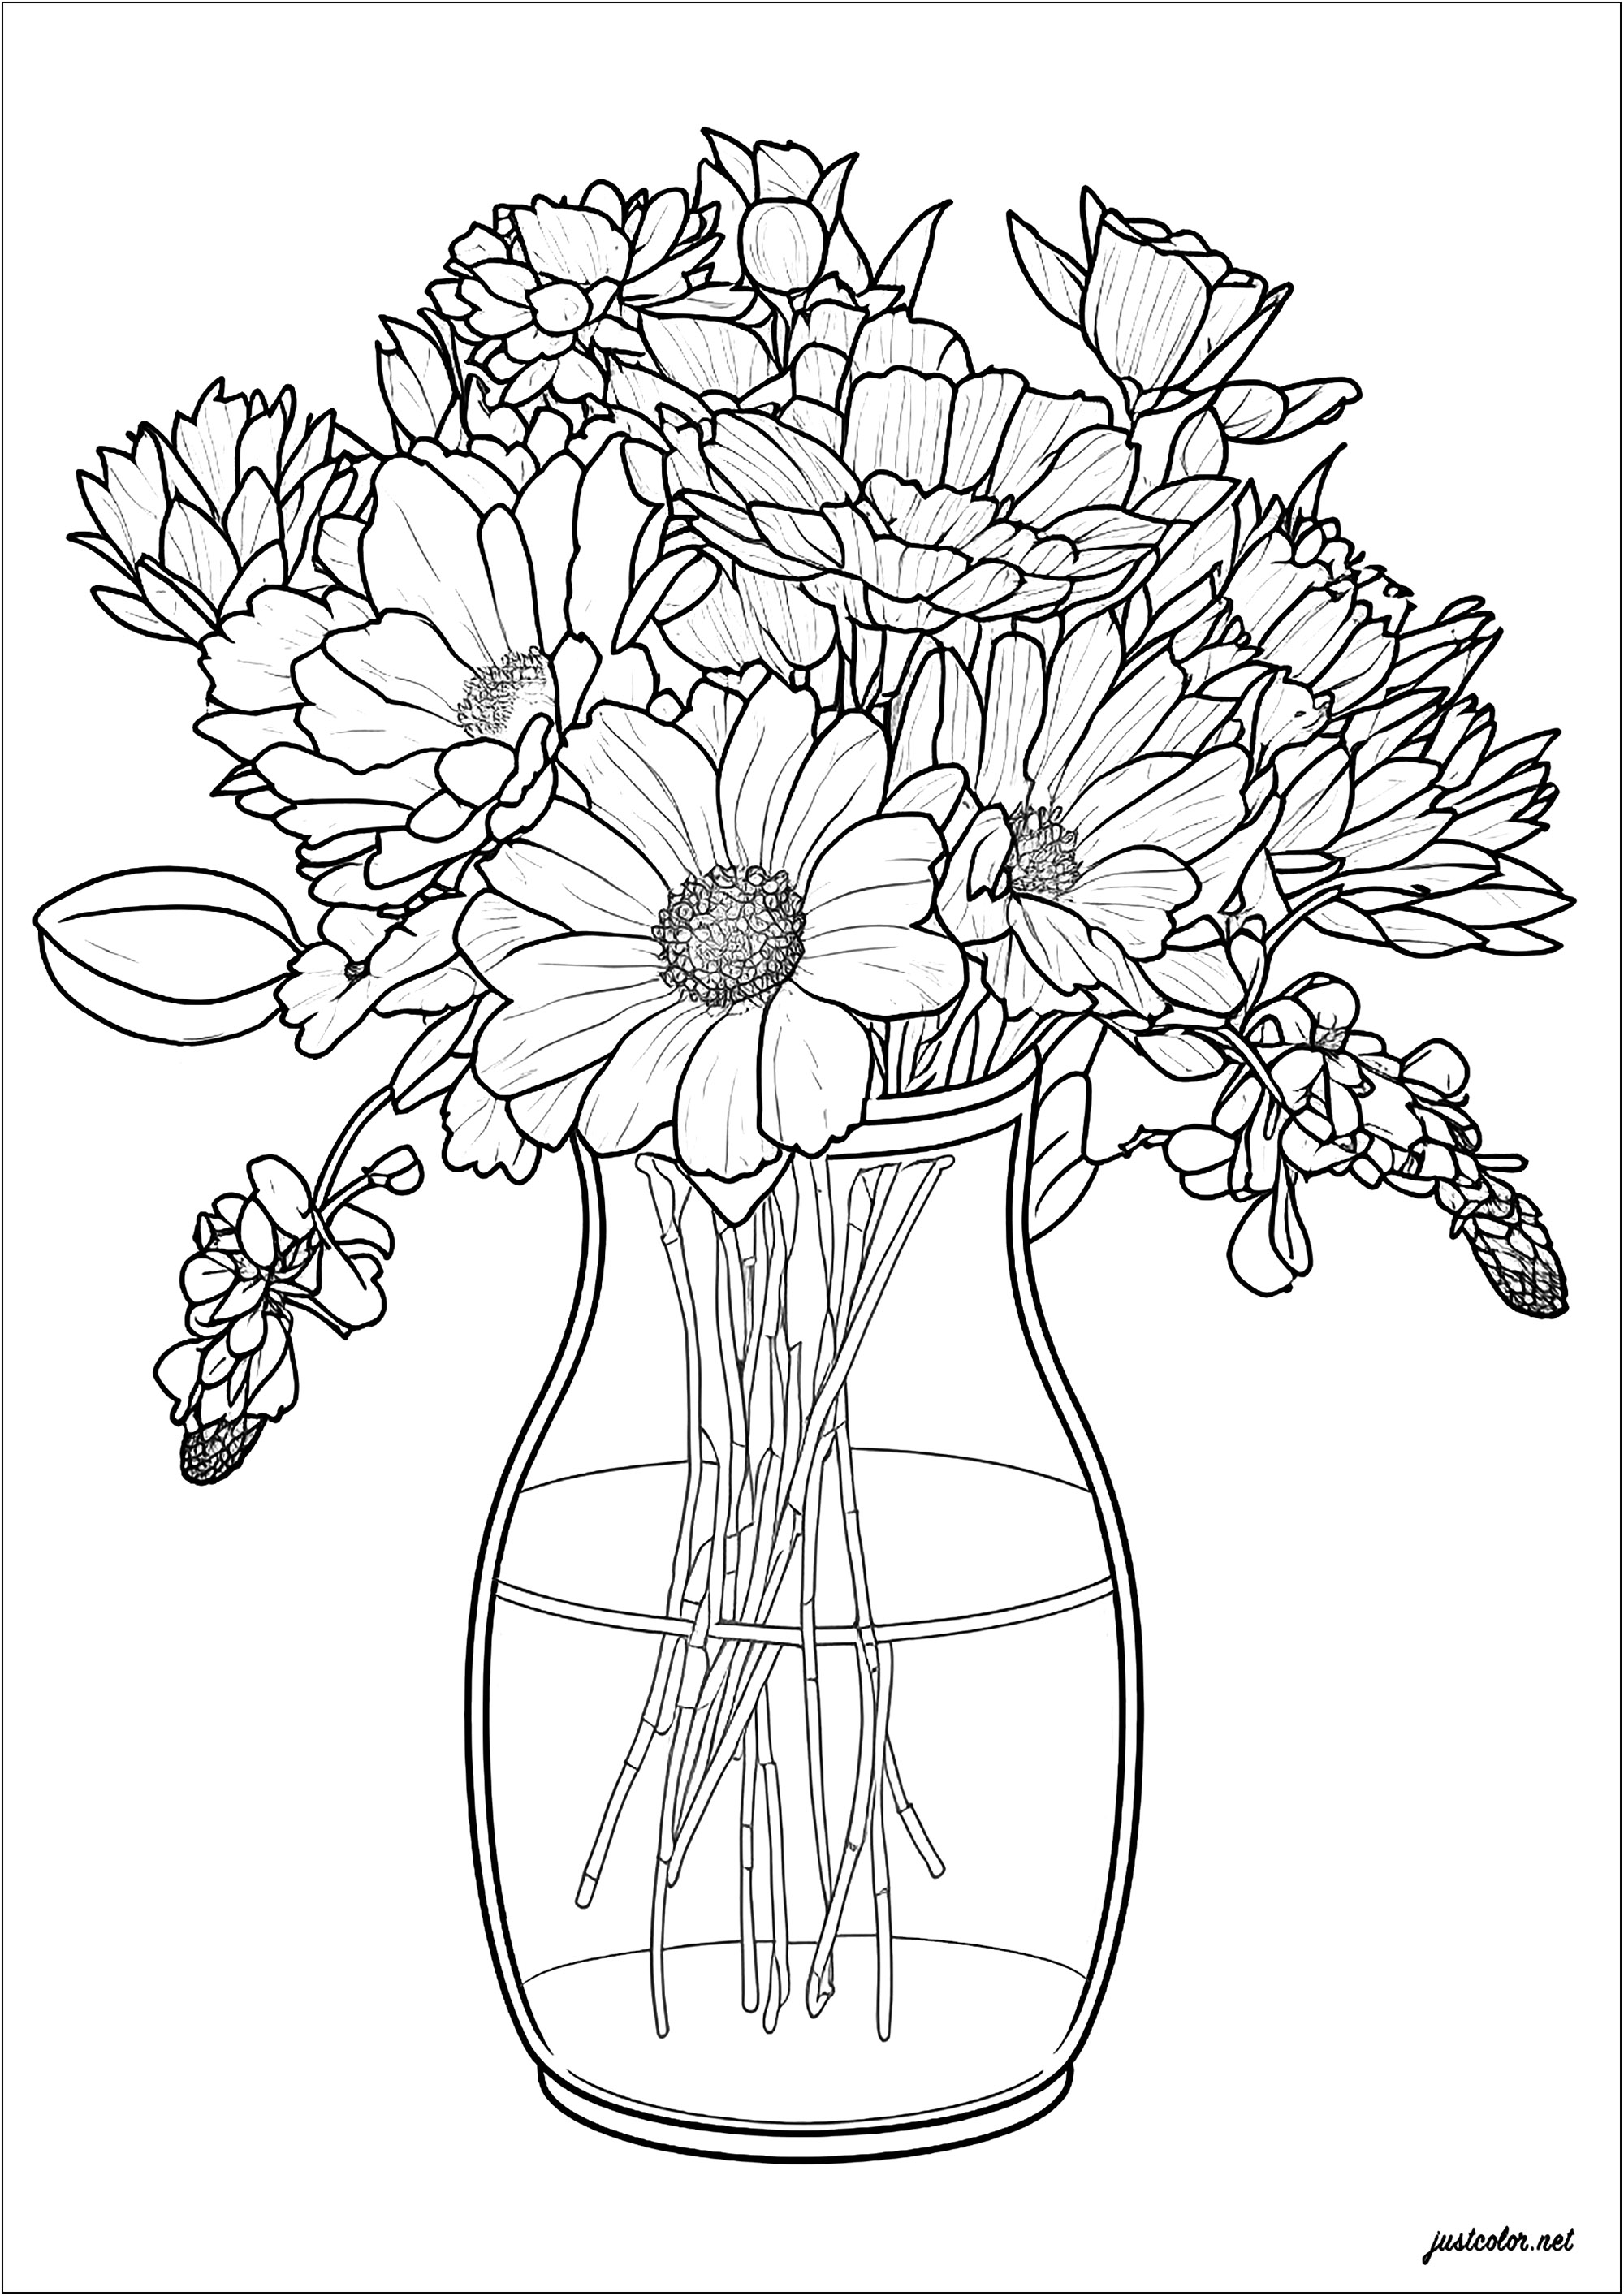 Vase and delicate flowers. A pretty design with fine lines, depicting beautiful flowers elegantly arranged in a glass vase. An excellent way to spend a pleasant moment creating something unique and beautiful.